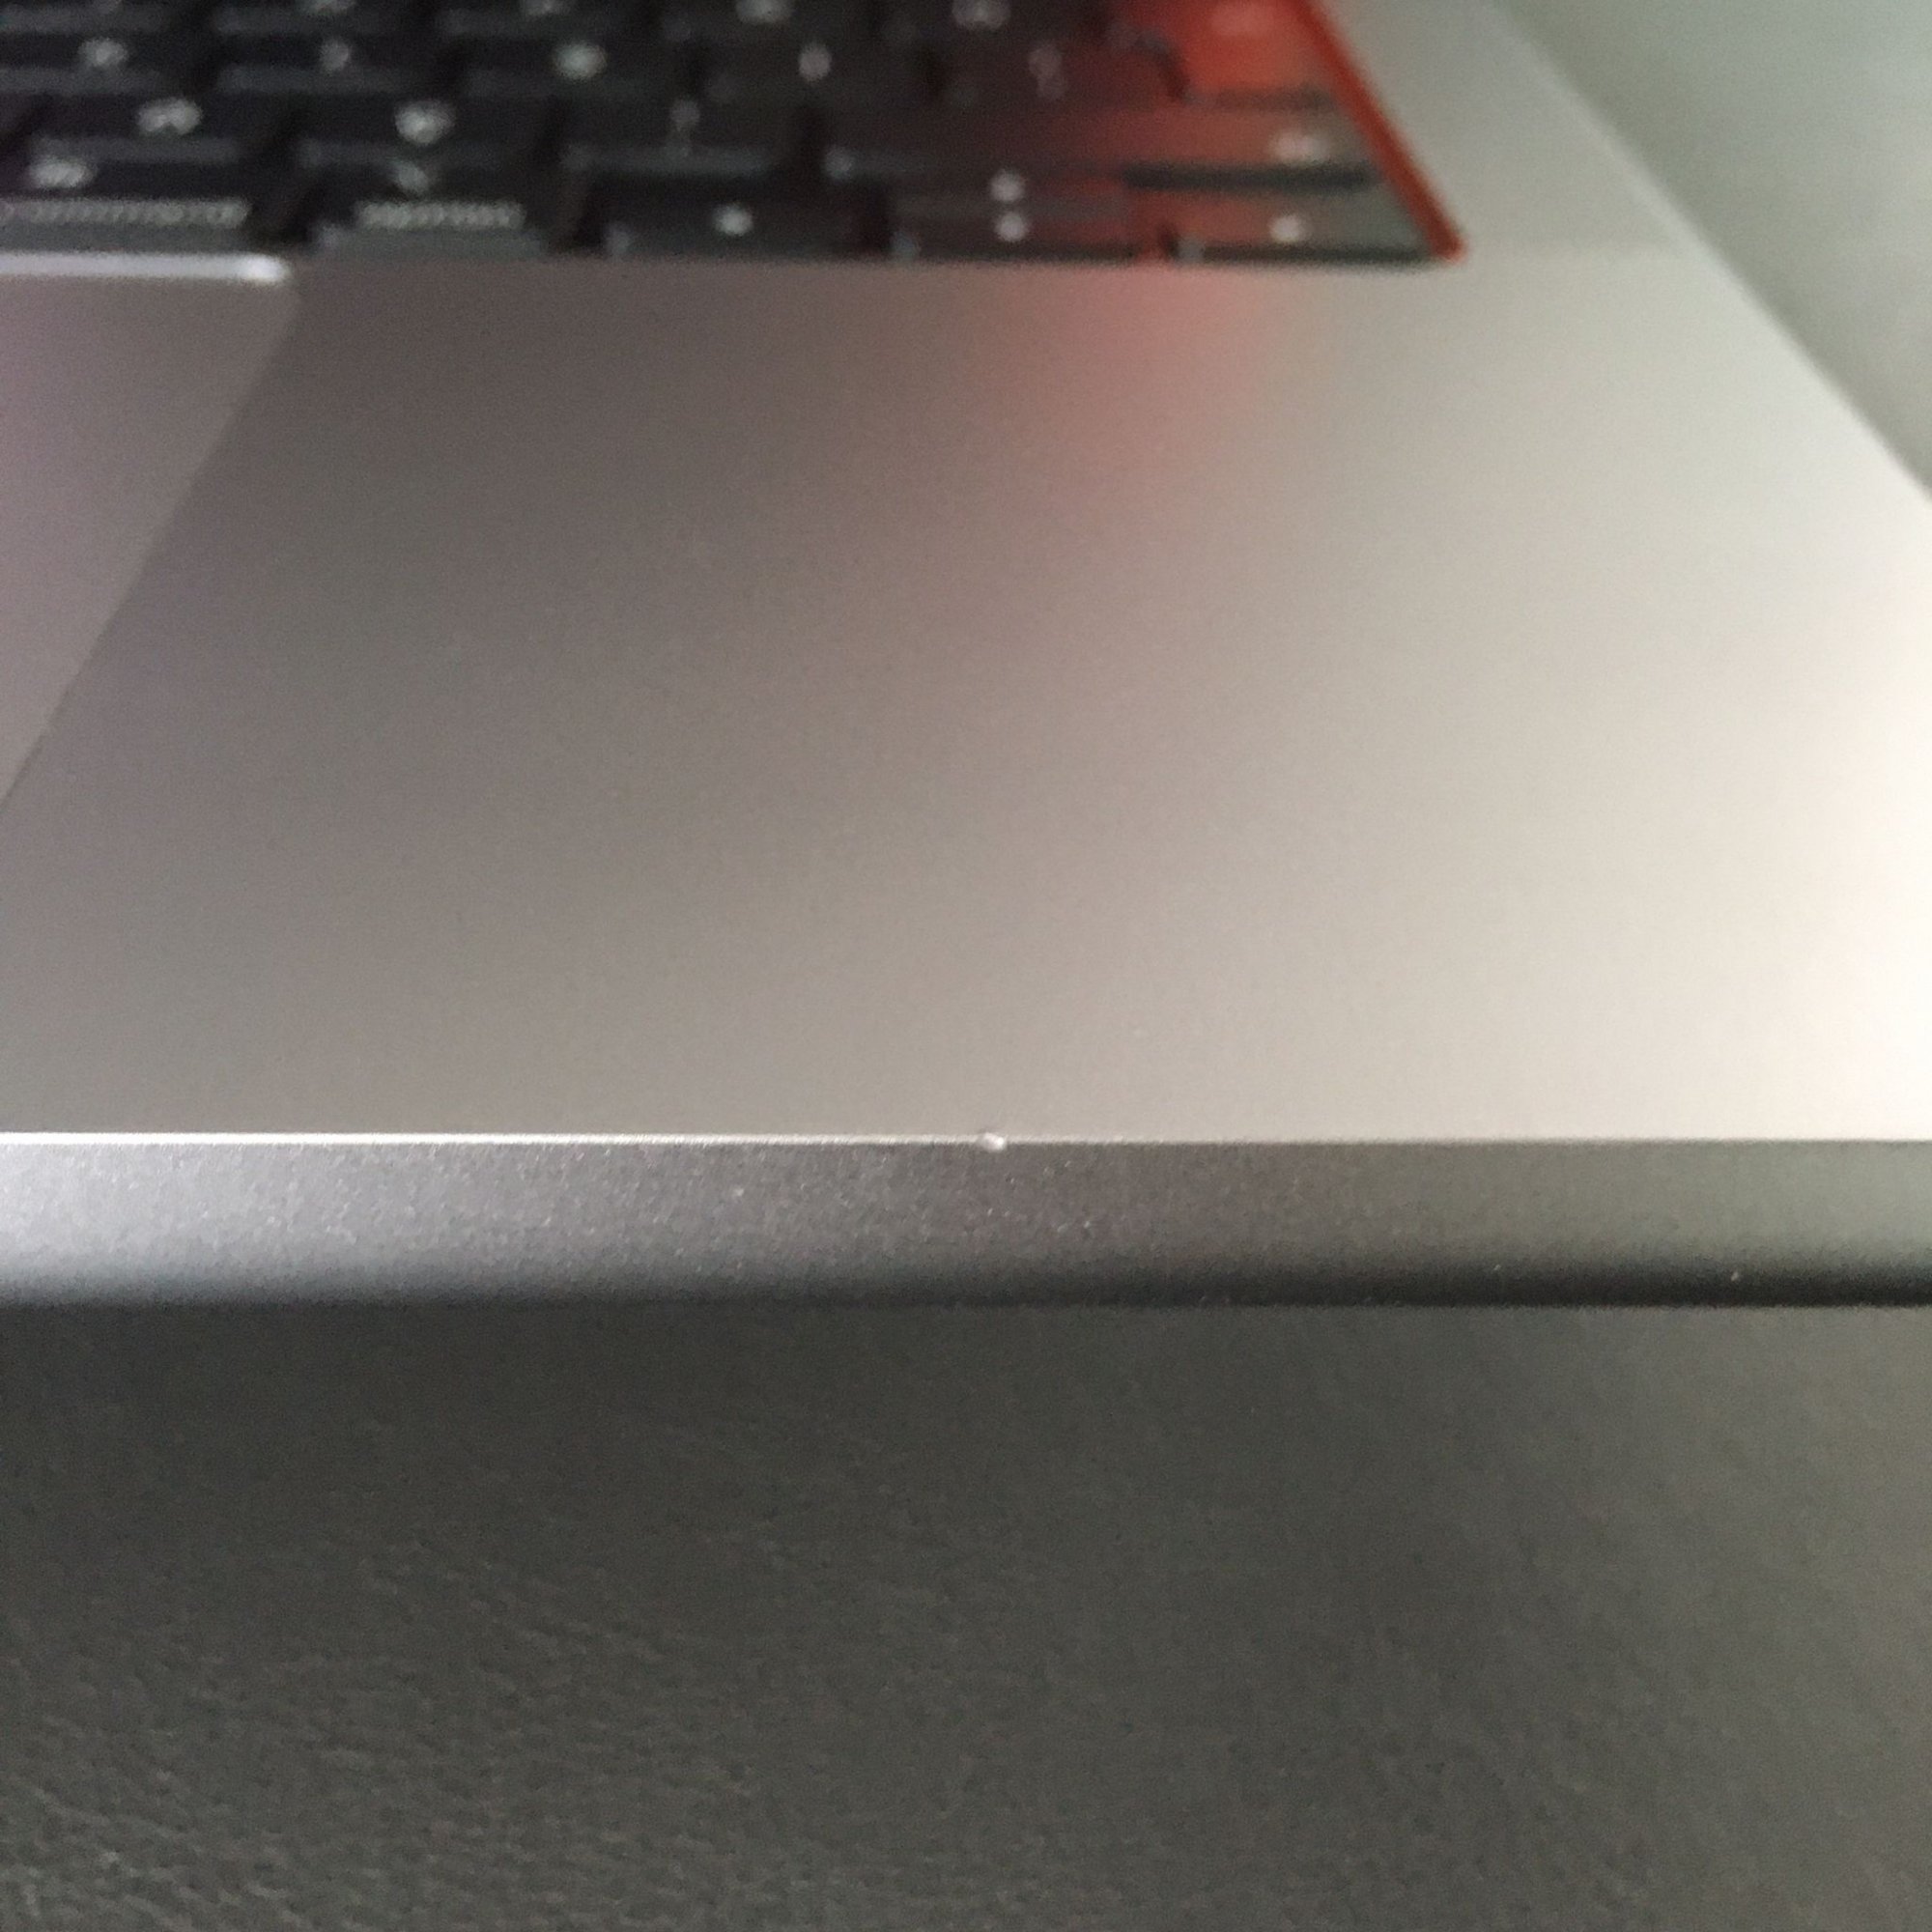 Macbook Pro 14 multiple scratches on delivery! | MacRumors Forums